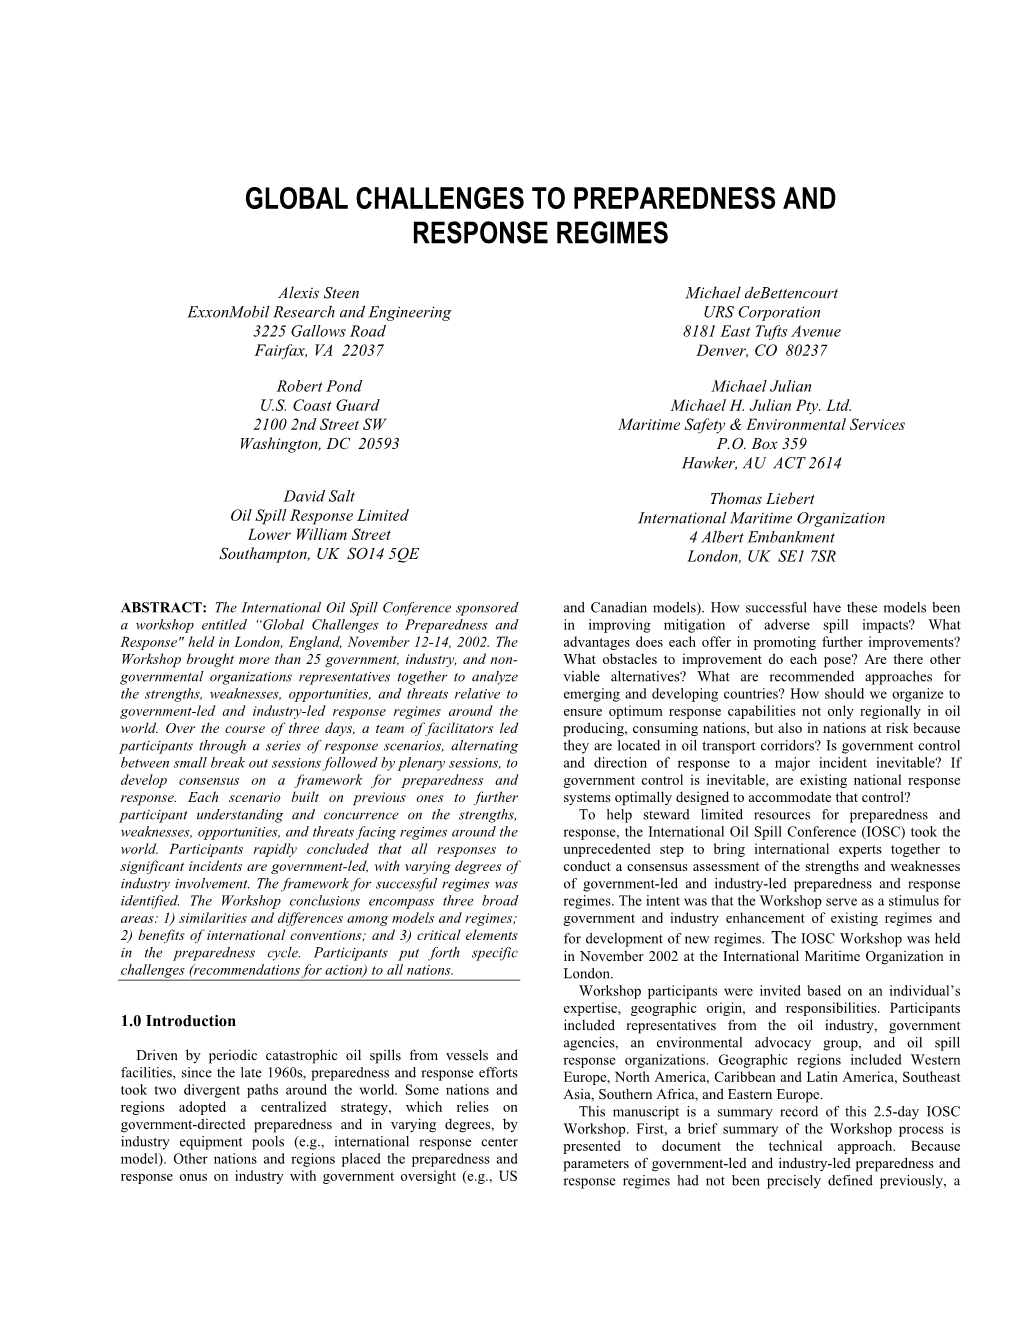 Global Challenges to Preparedness and Response Regimes